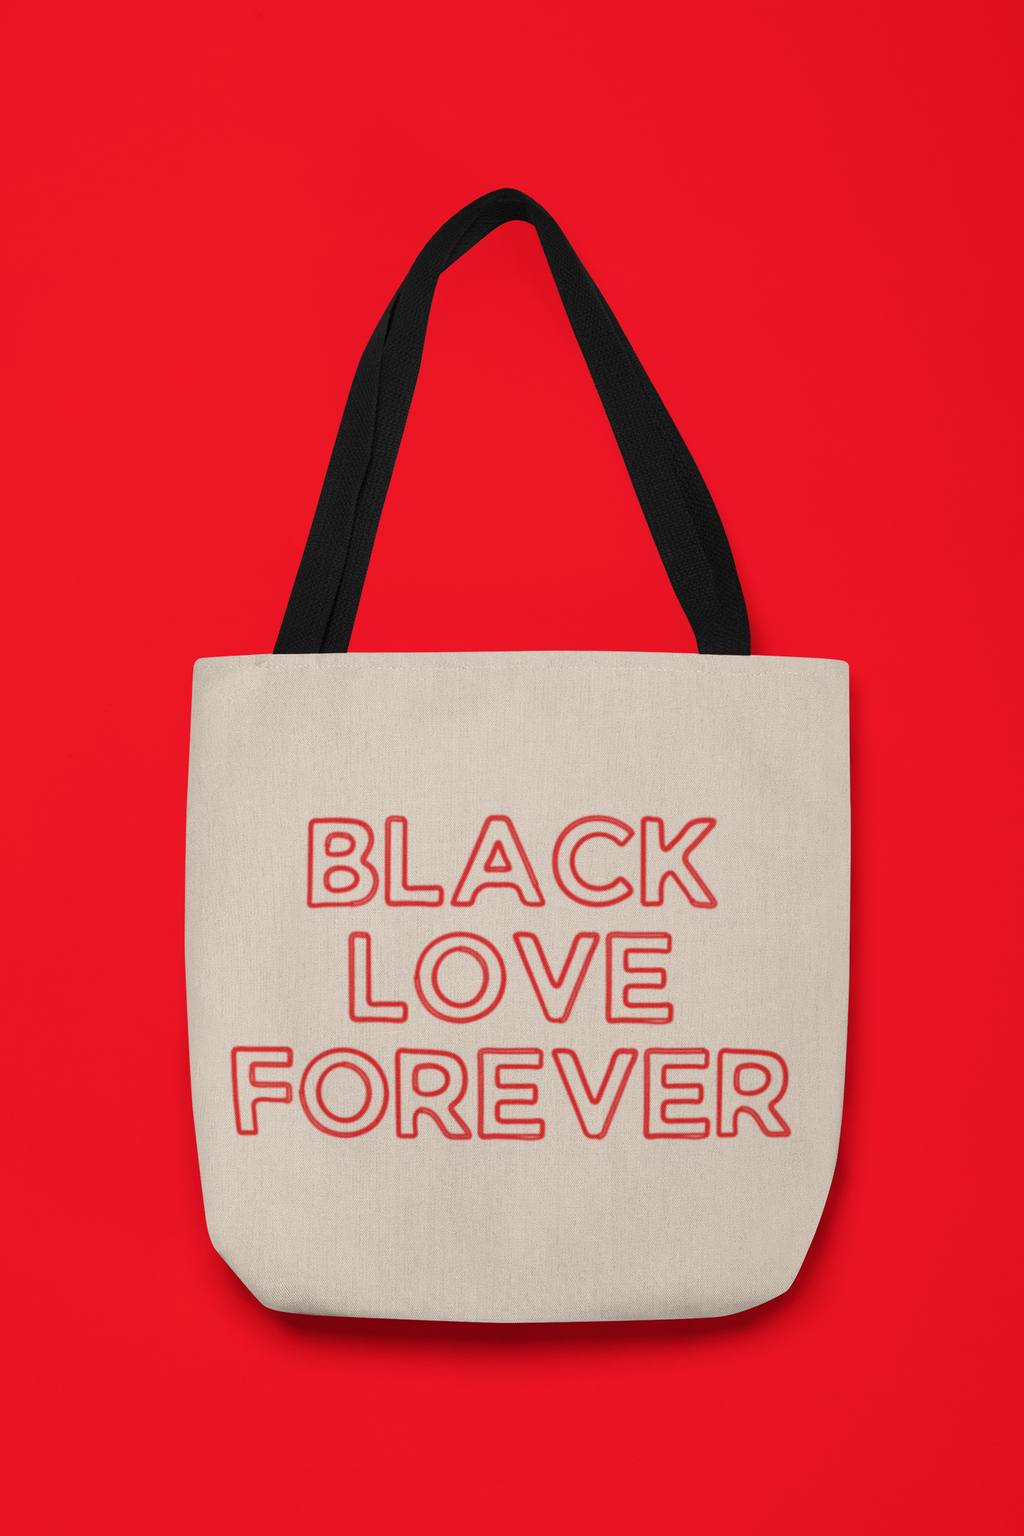 Black Love Forever Tote Bag - Red Text